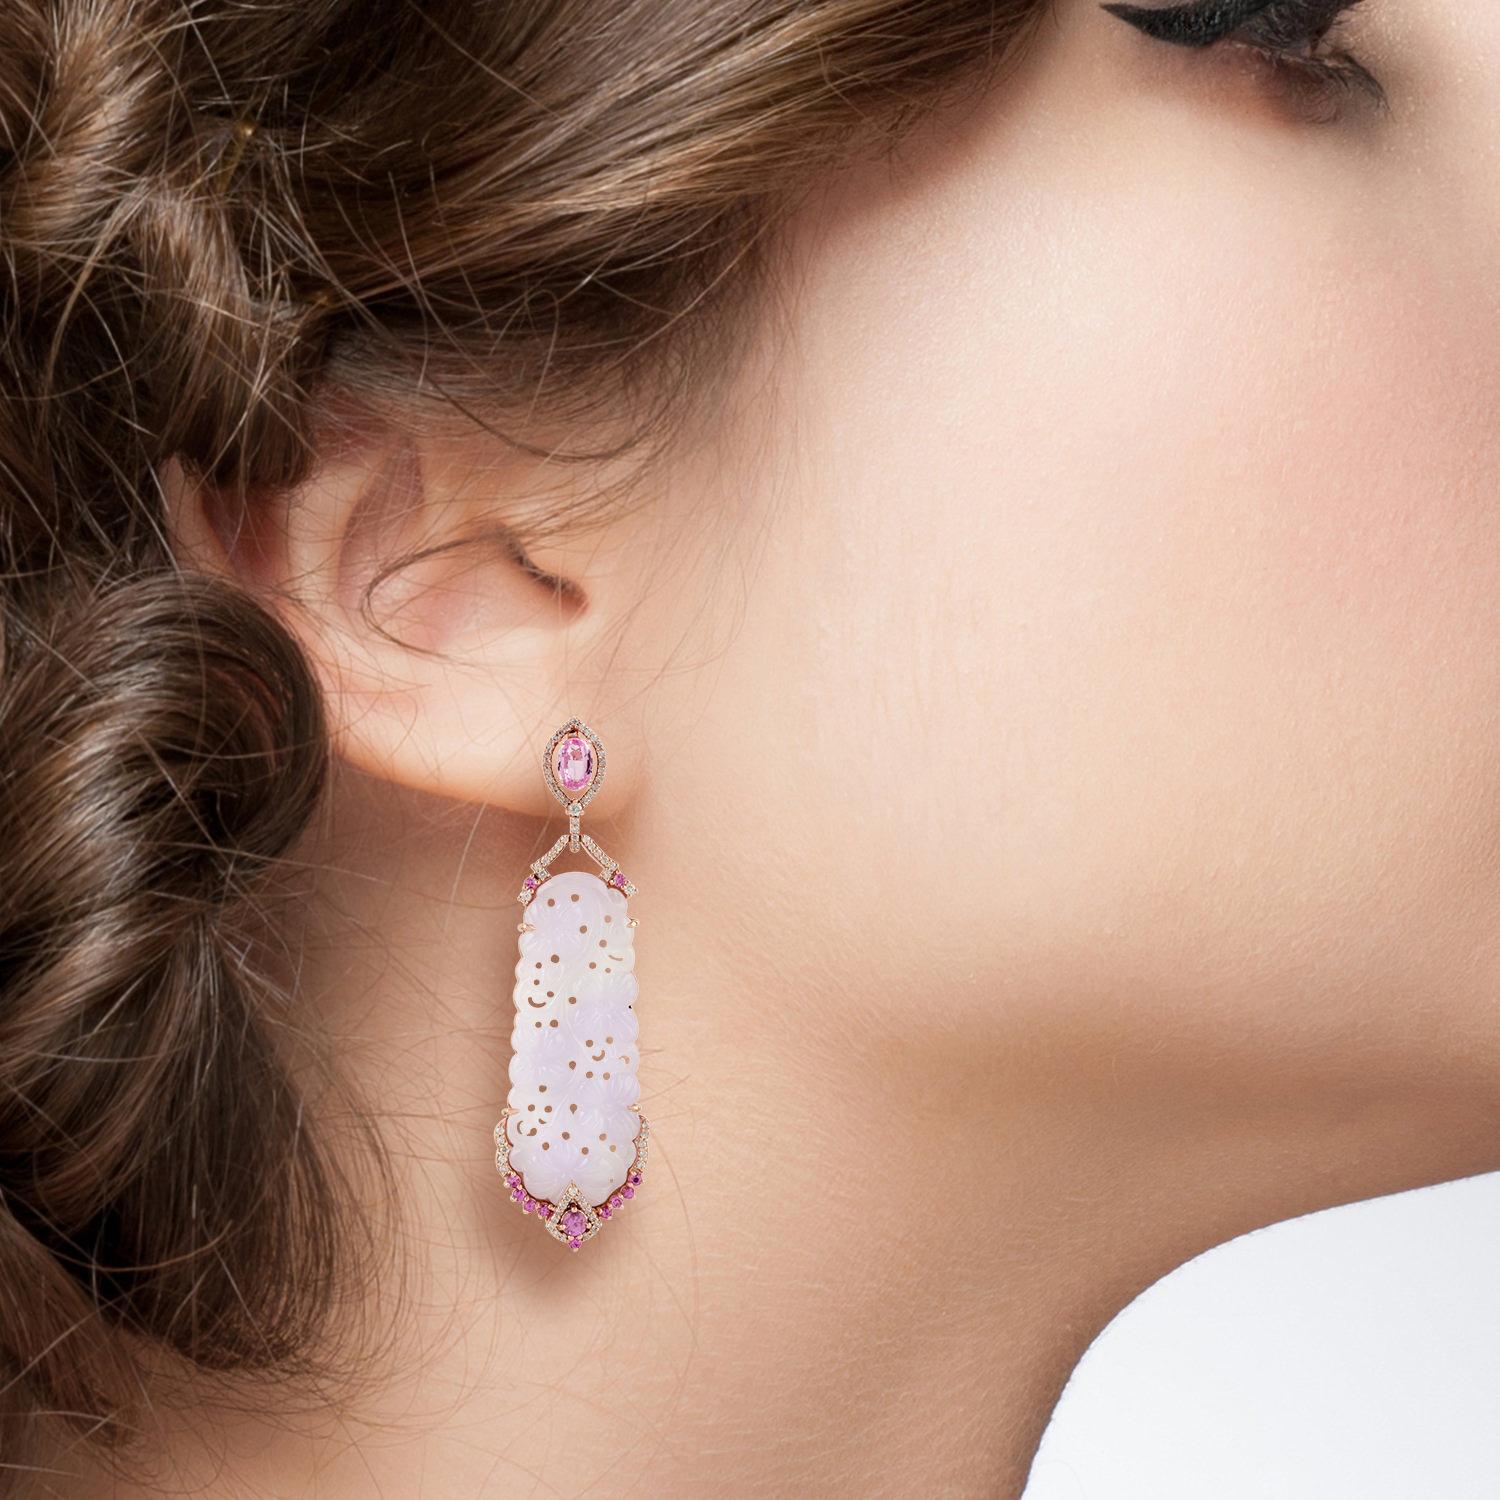 These stunning hand carved Jade earrings are crafted in 18-karat gold. It is set in 28.3 carats Jade, 1.92 carats pink sapphire and .61 carats of sparkling diamonds.

FOLLOW  MEGHNA JEWELS storefront to view the latest collection & exclusive pieces.